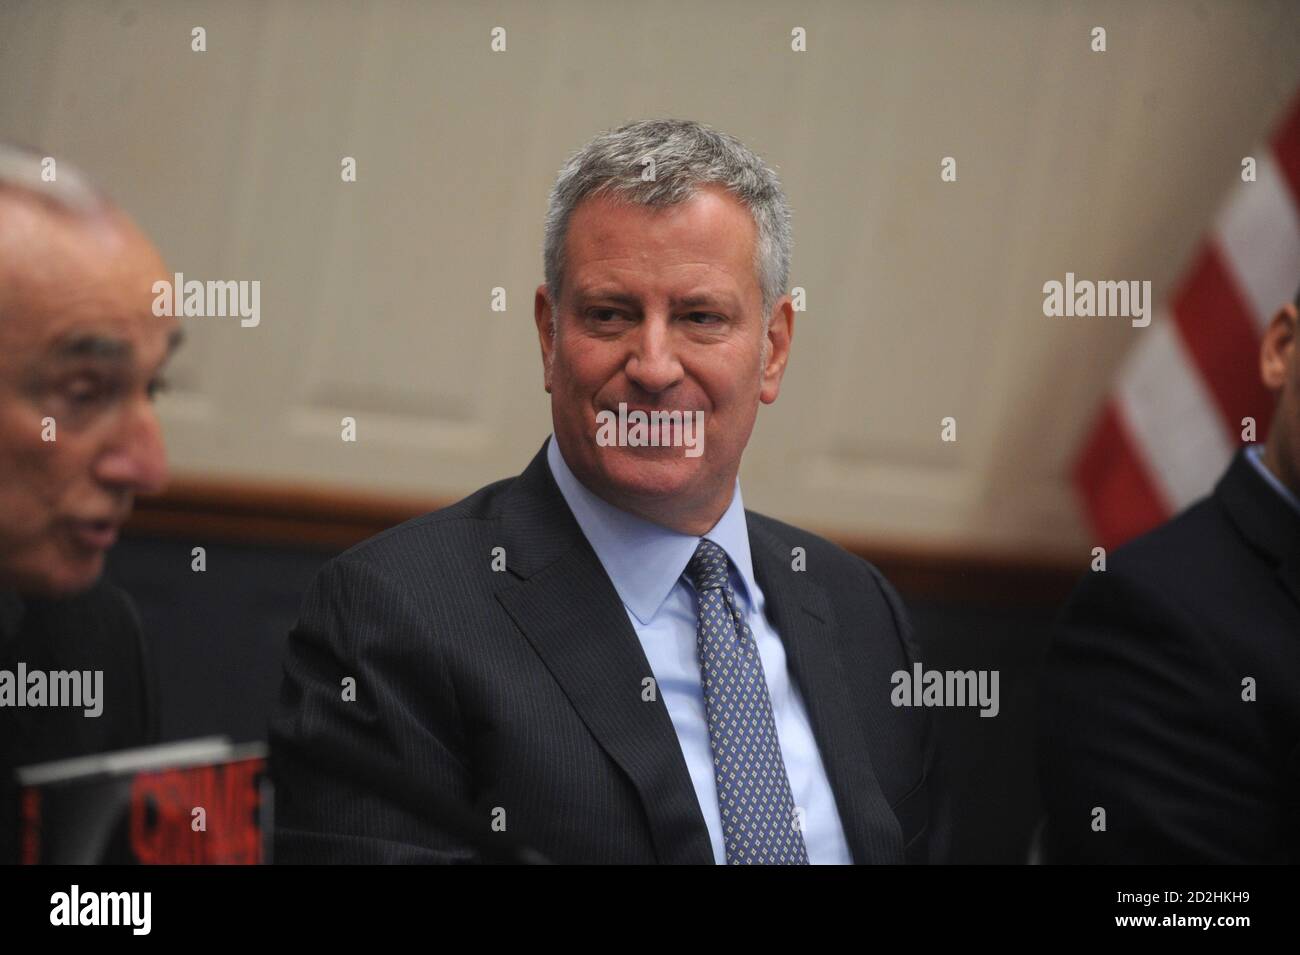 NEW YORK, NY - AUGUST 04: Incoming NYPD Commissioner James O'Neill, departing NYPD Commissioner William Bratton and New York City Mayor Bill De Blasio preside over a press conference regarding updated crime statistics at One Police Plaza on August 4, 2016 in New York City People:  Bill de Blasio Credit: Hoo-me / MediaPunch Stock Photo